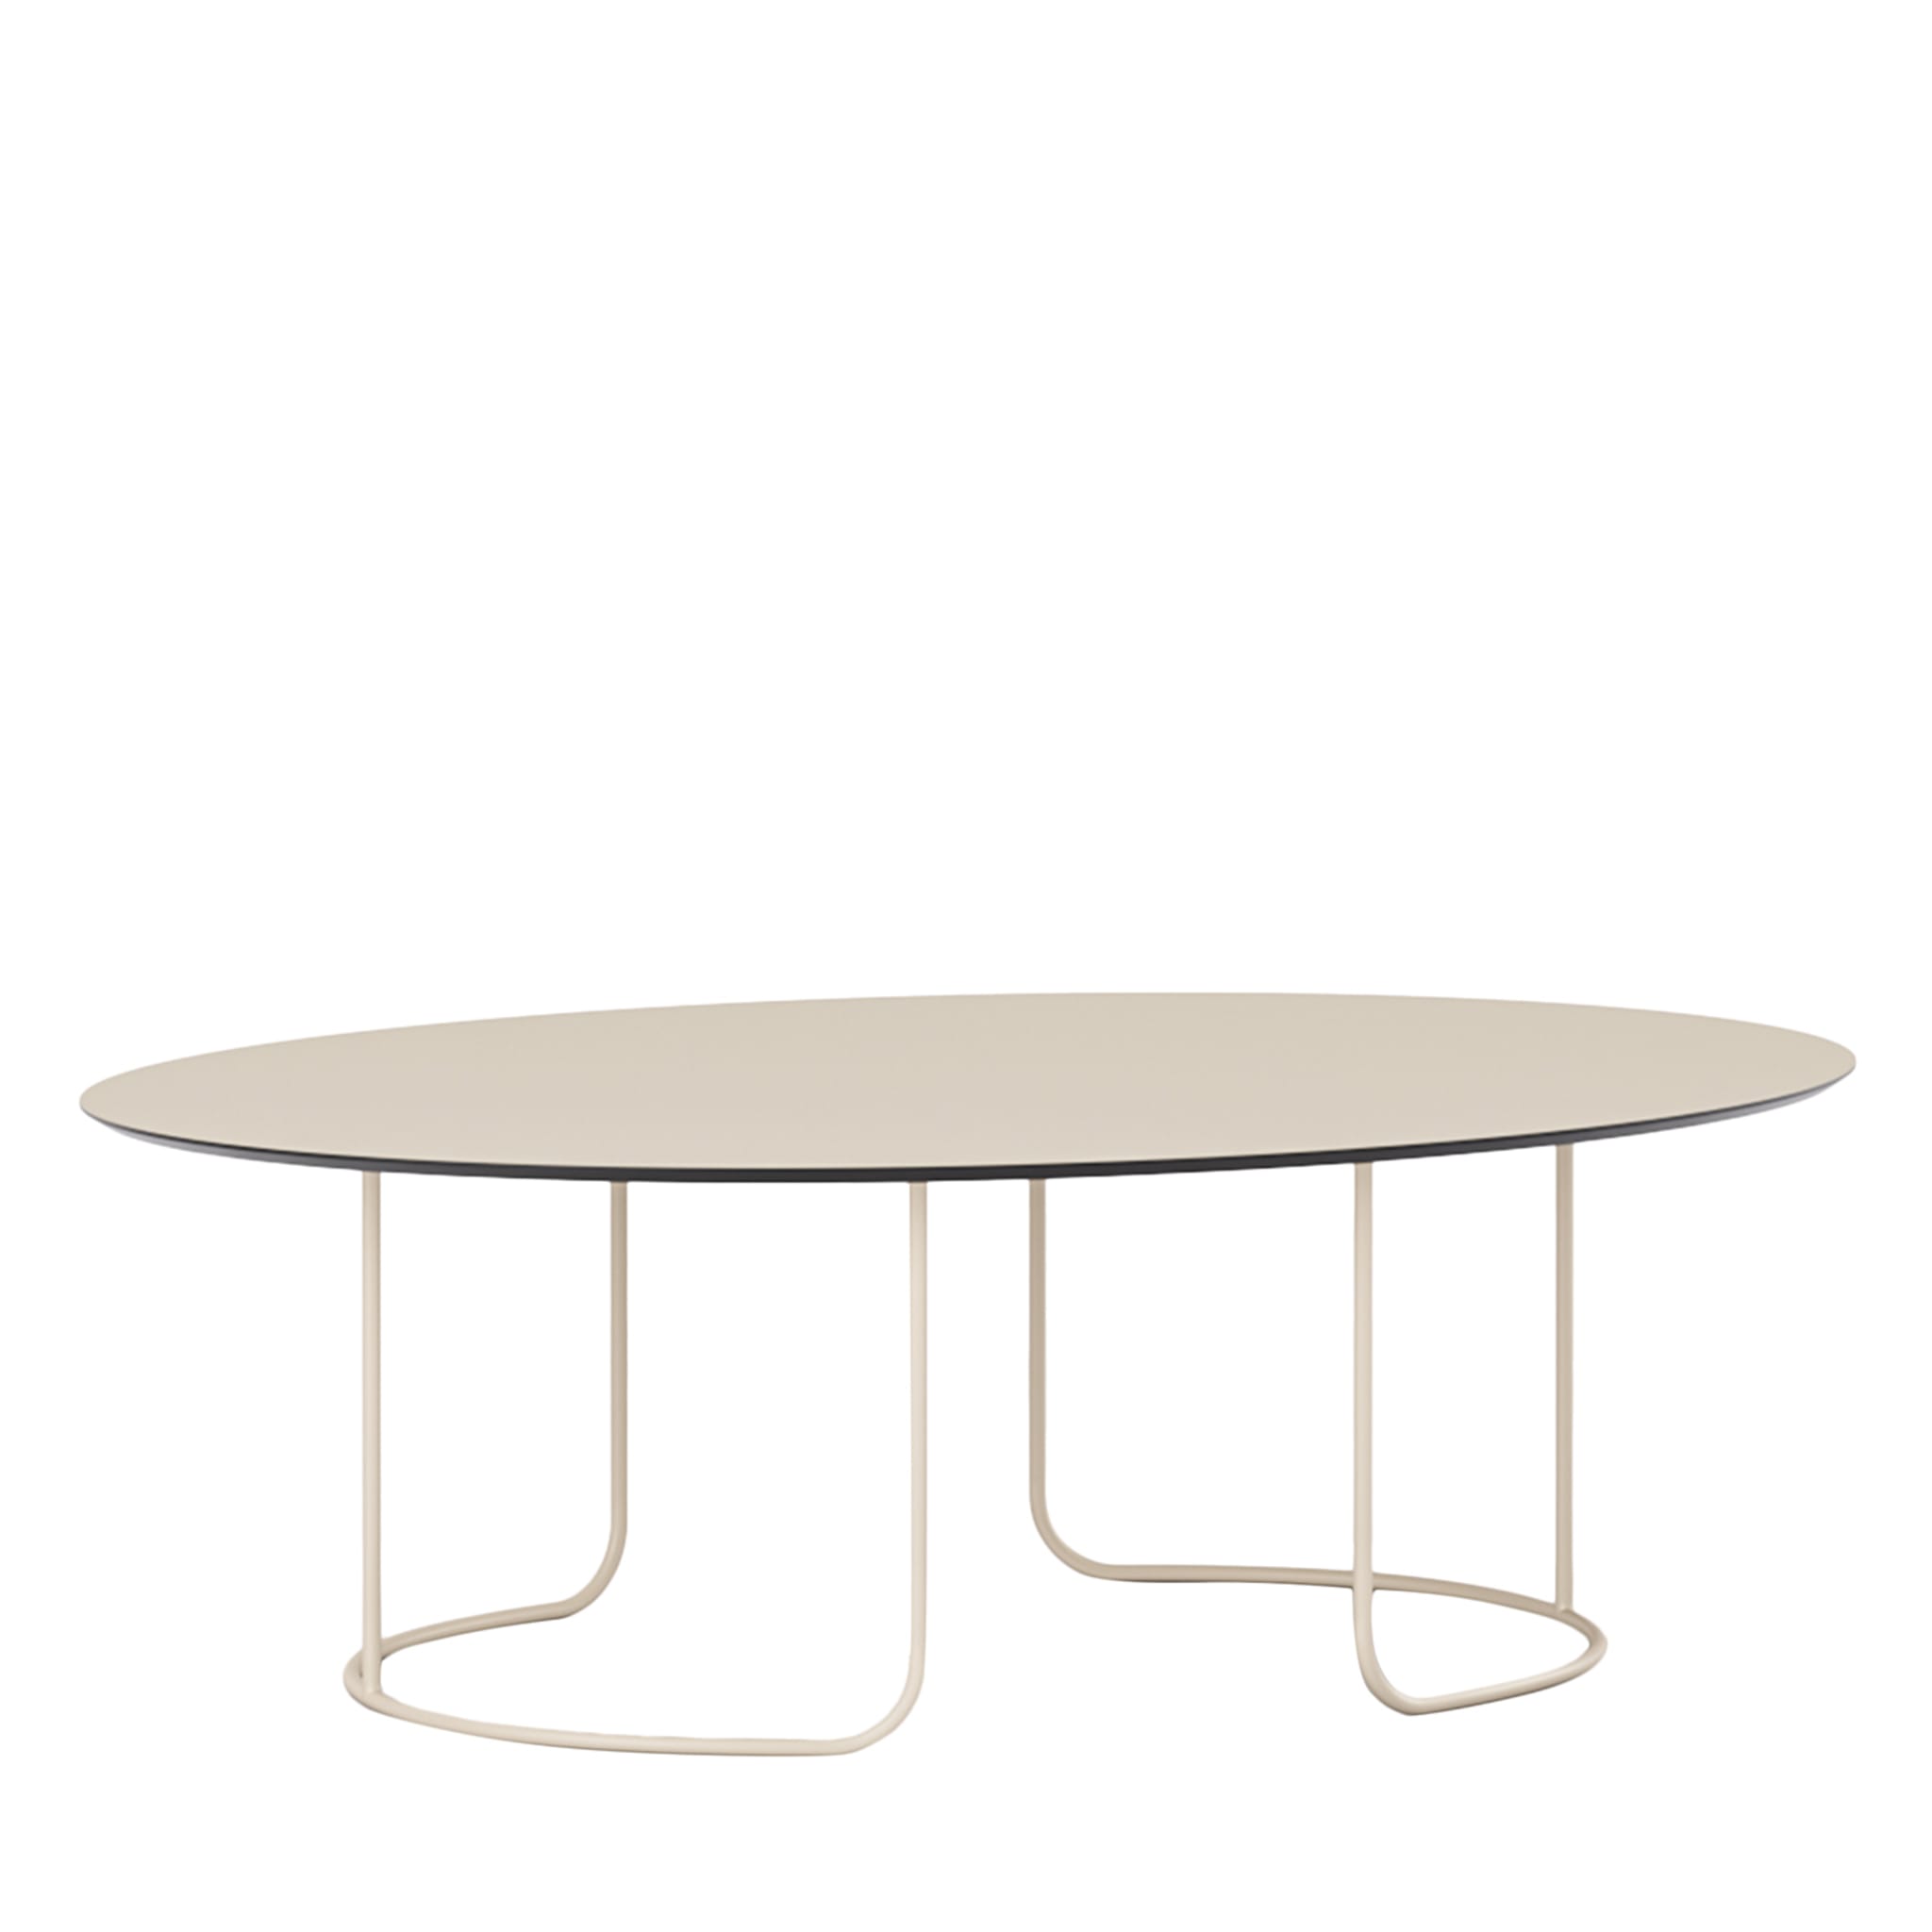 Scala Oval Beige Coffee Table by Marco Piva - Main view